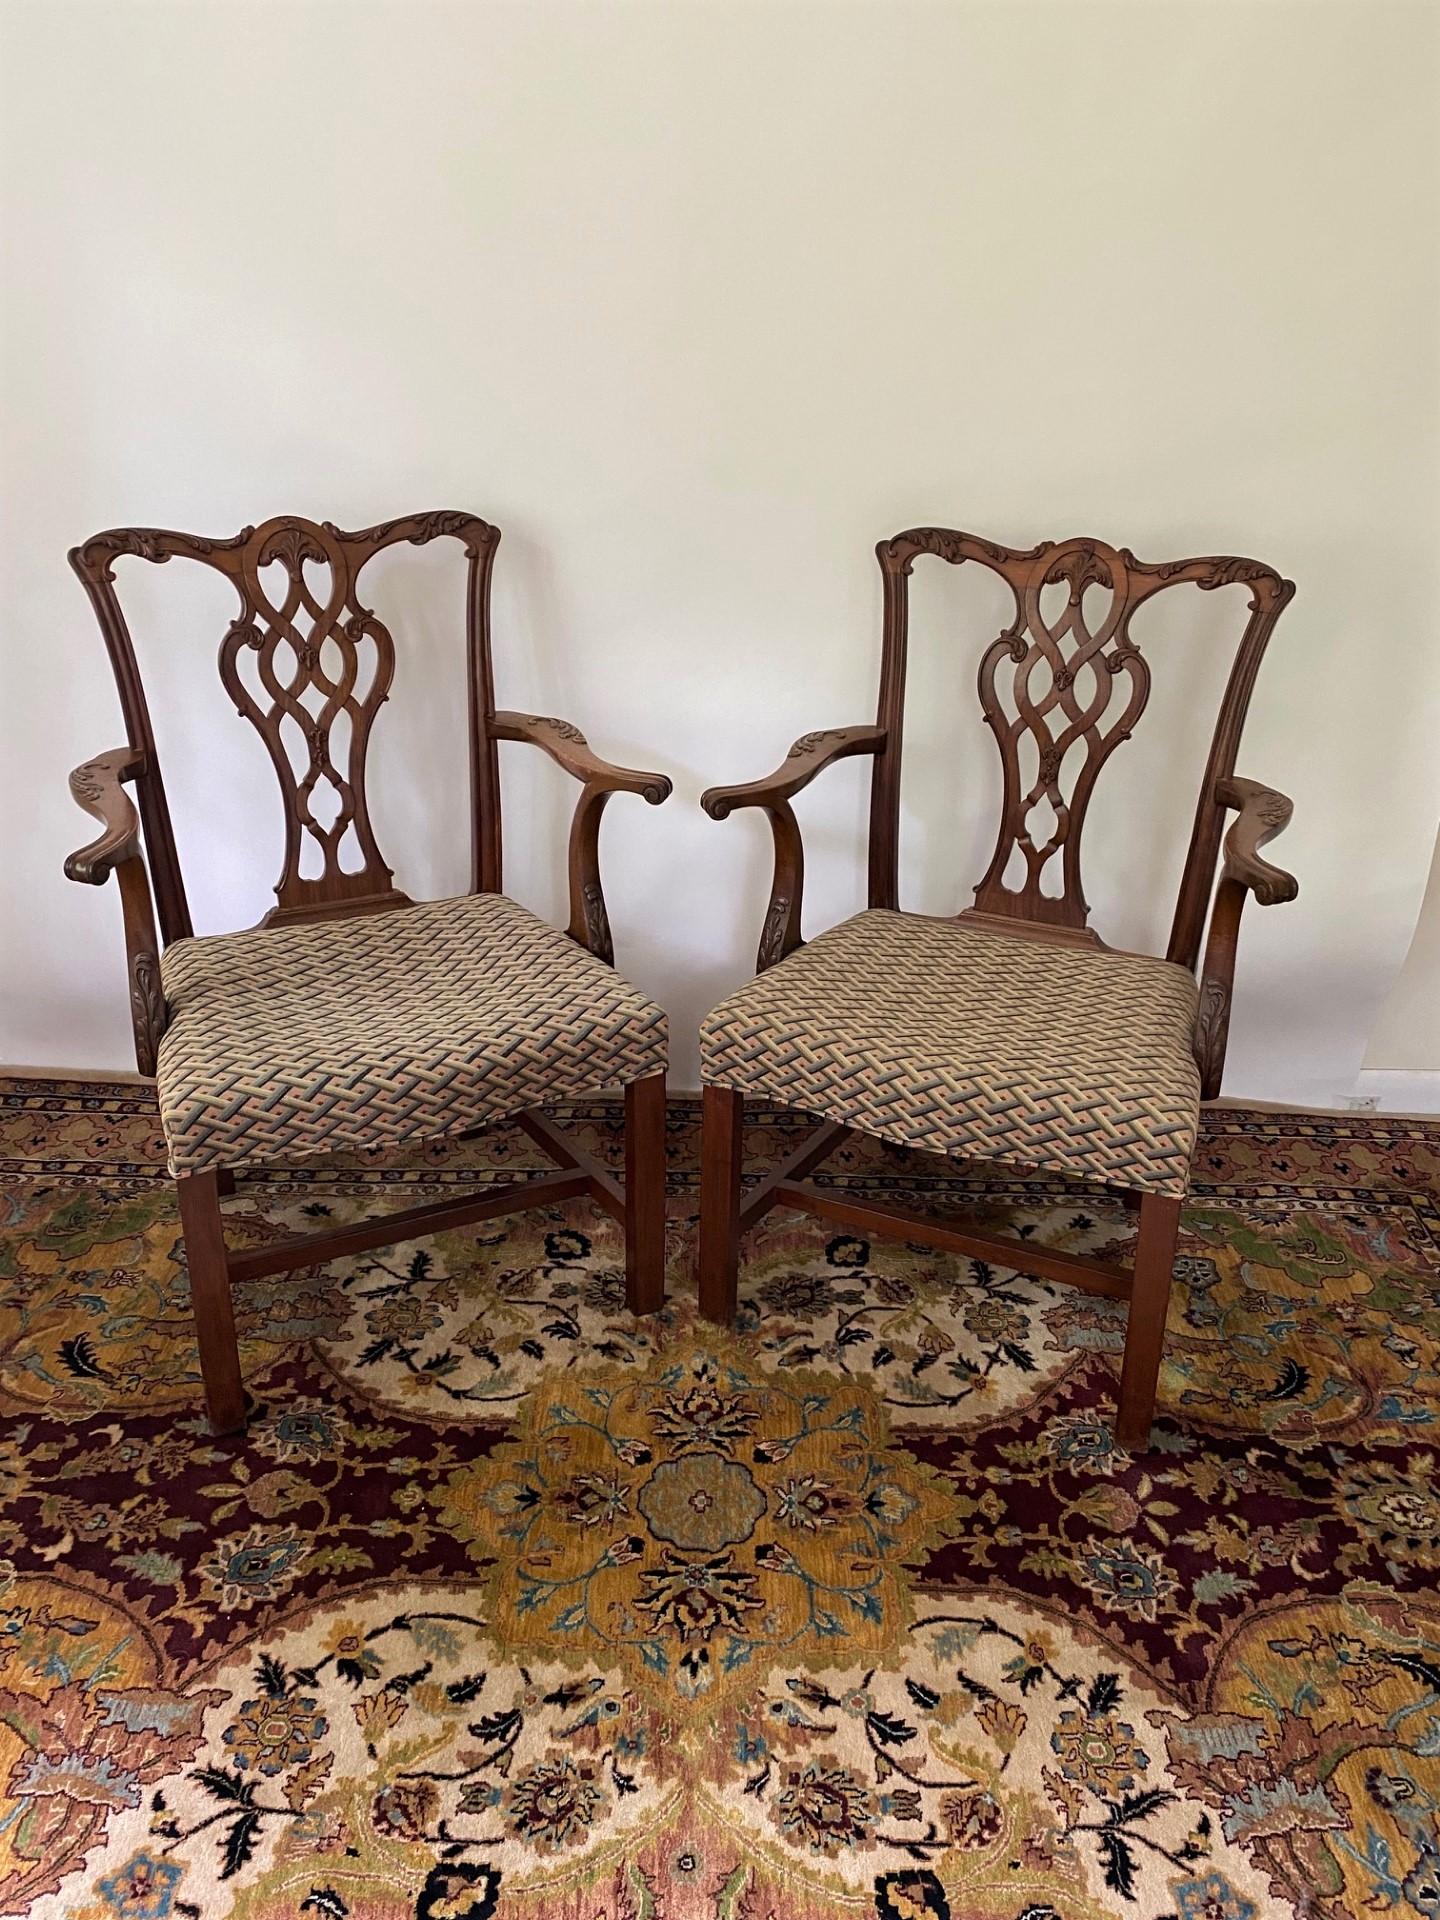 A very fine solid mahogany Chippendale style armchair is a true testament to Classic design and craftsmanship. This pair of armchairs exudes elegance and sophistication with its exquisite details and rich materials.
These chairs features a